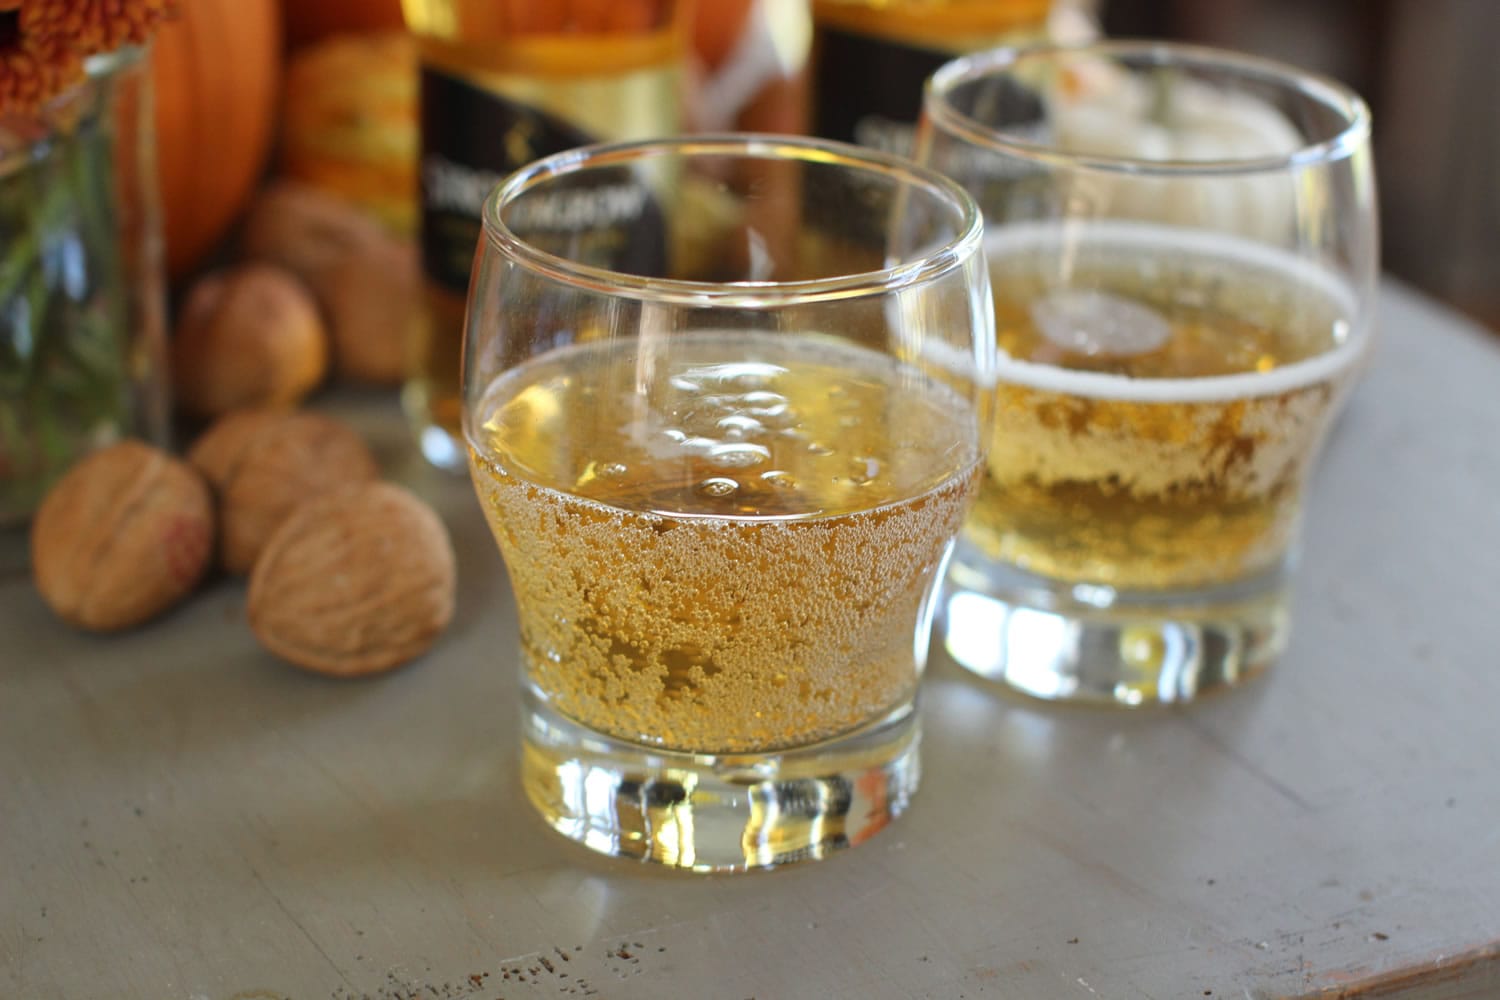 Cider typically is lower in alcohol than wine, averaging 5 to 7 percent, but has enough acid and tannins to cleanse and refresh the palate for the next bite.